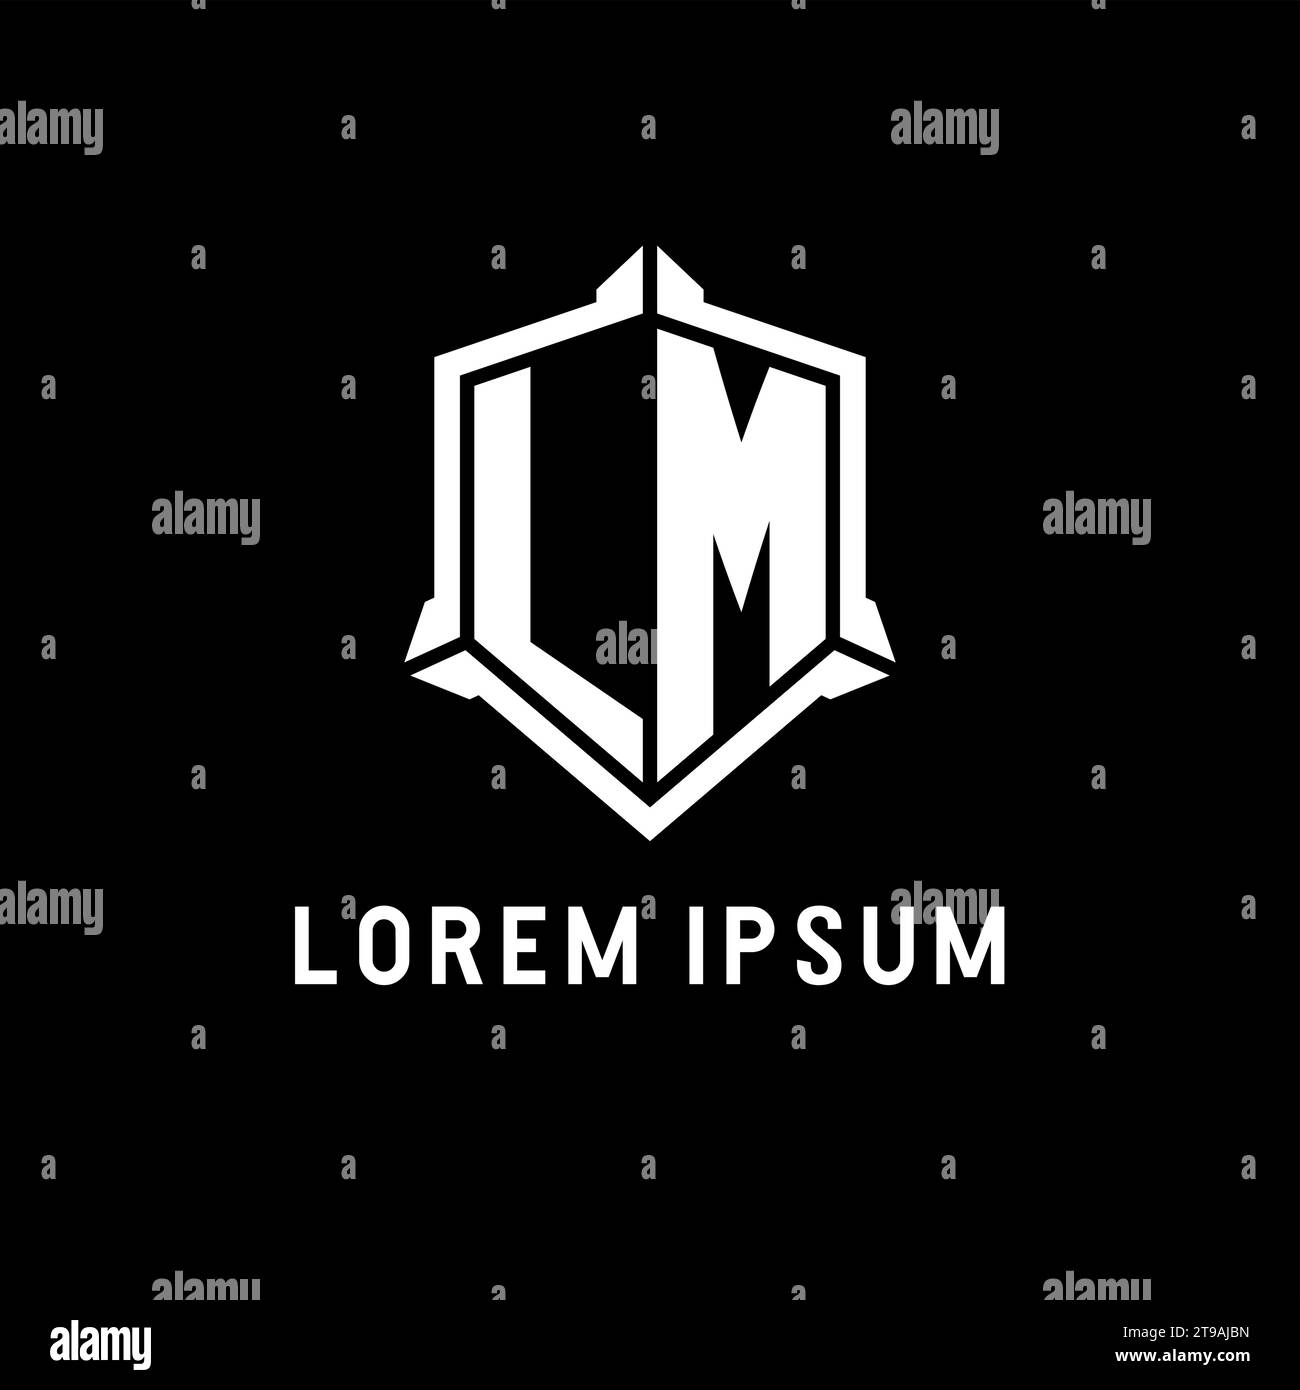 LM logo initial with shield shape design style vector graphic Stock Vector